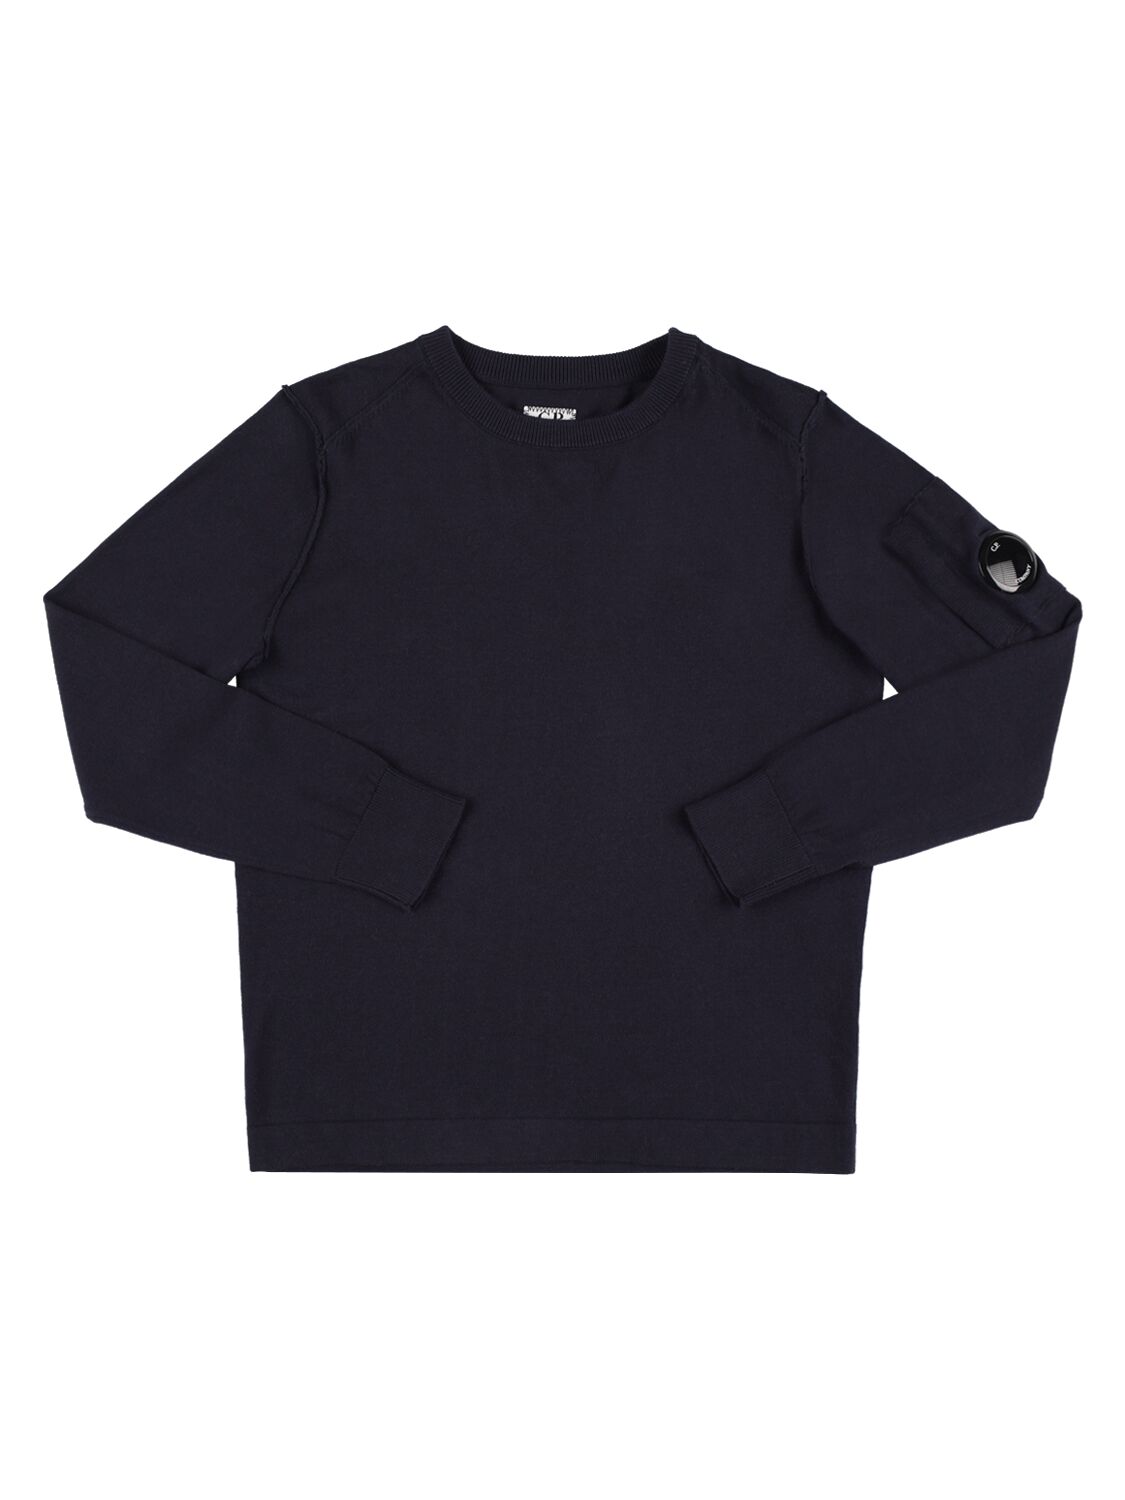 C.p. Company Kids' Cotton Knit Sweater In Navy